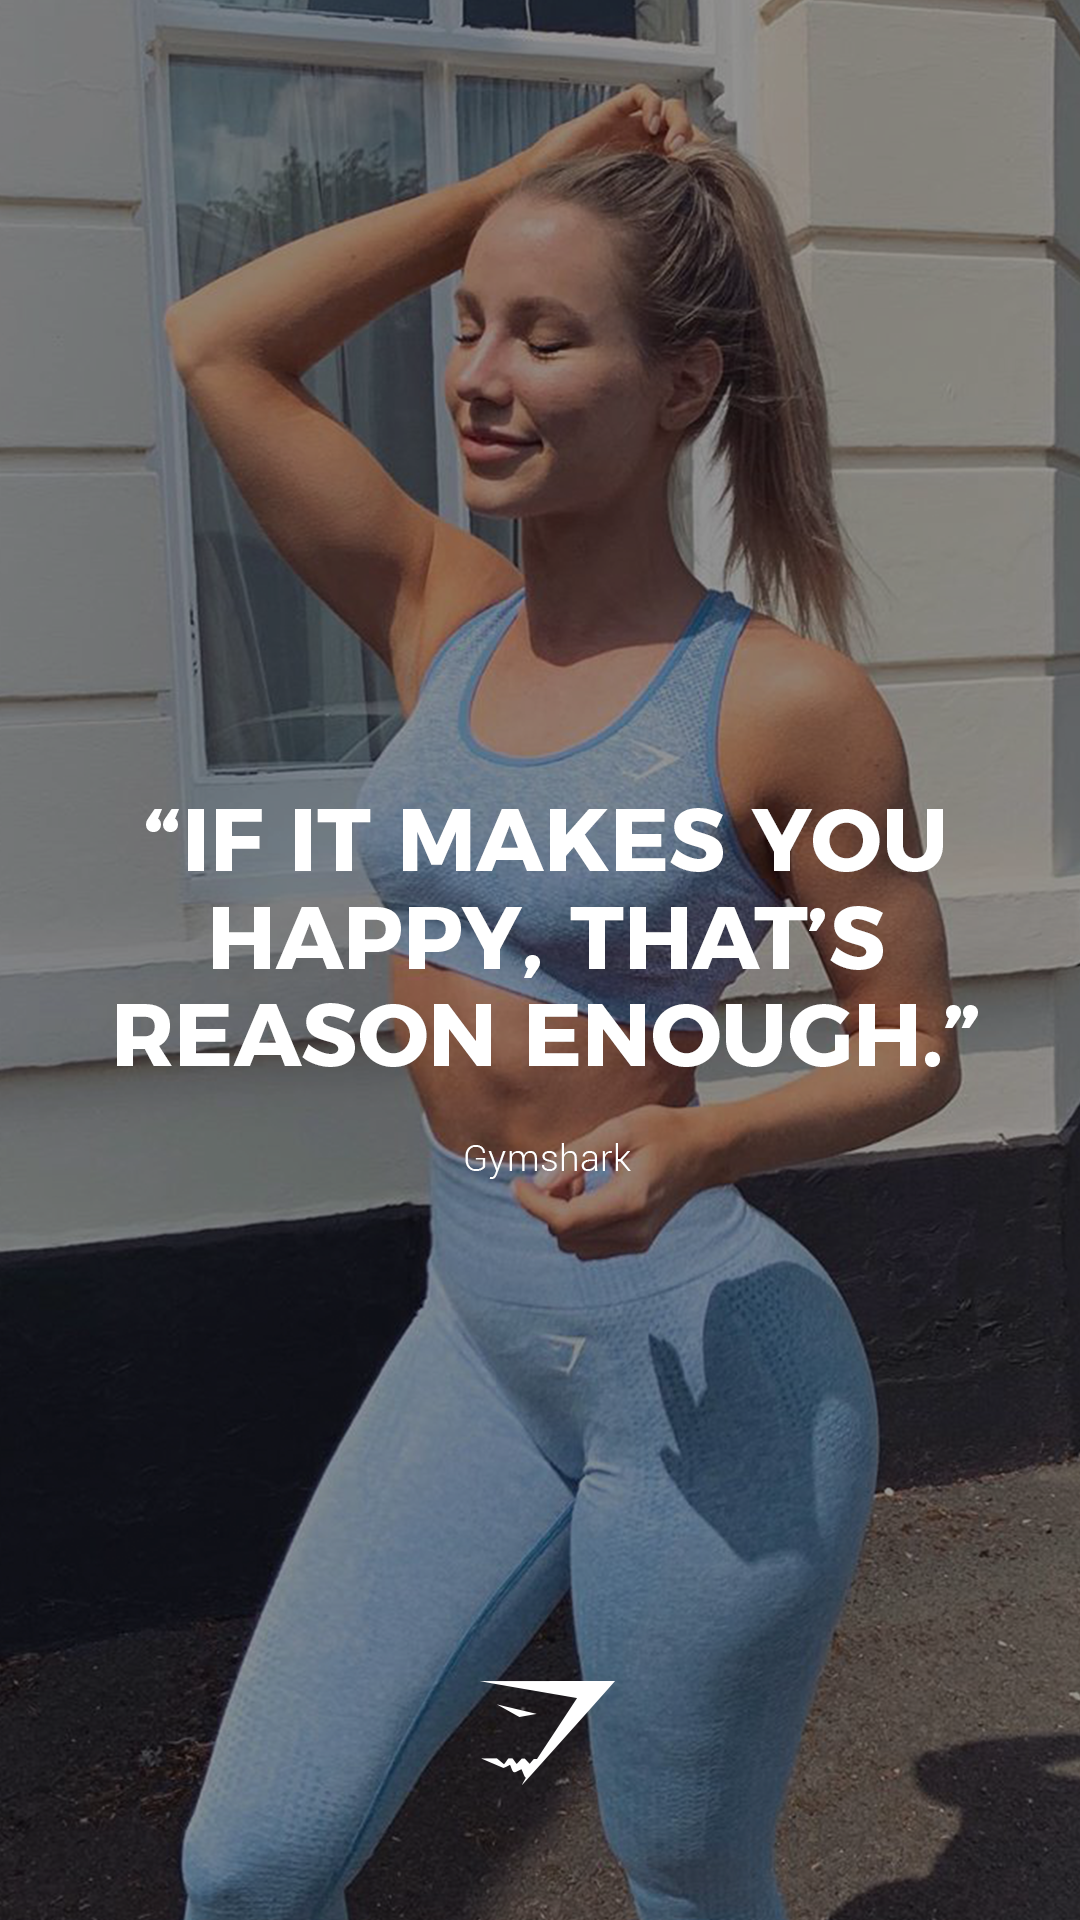 Gymshark Official Store | Gym Clothes & Workout Wear | Gymshark - Gymshark Official Store | Gym Clothes & Workout Wear | Gymshark -   9 fitness Quotes gymshark ideas